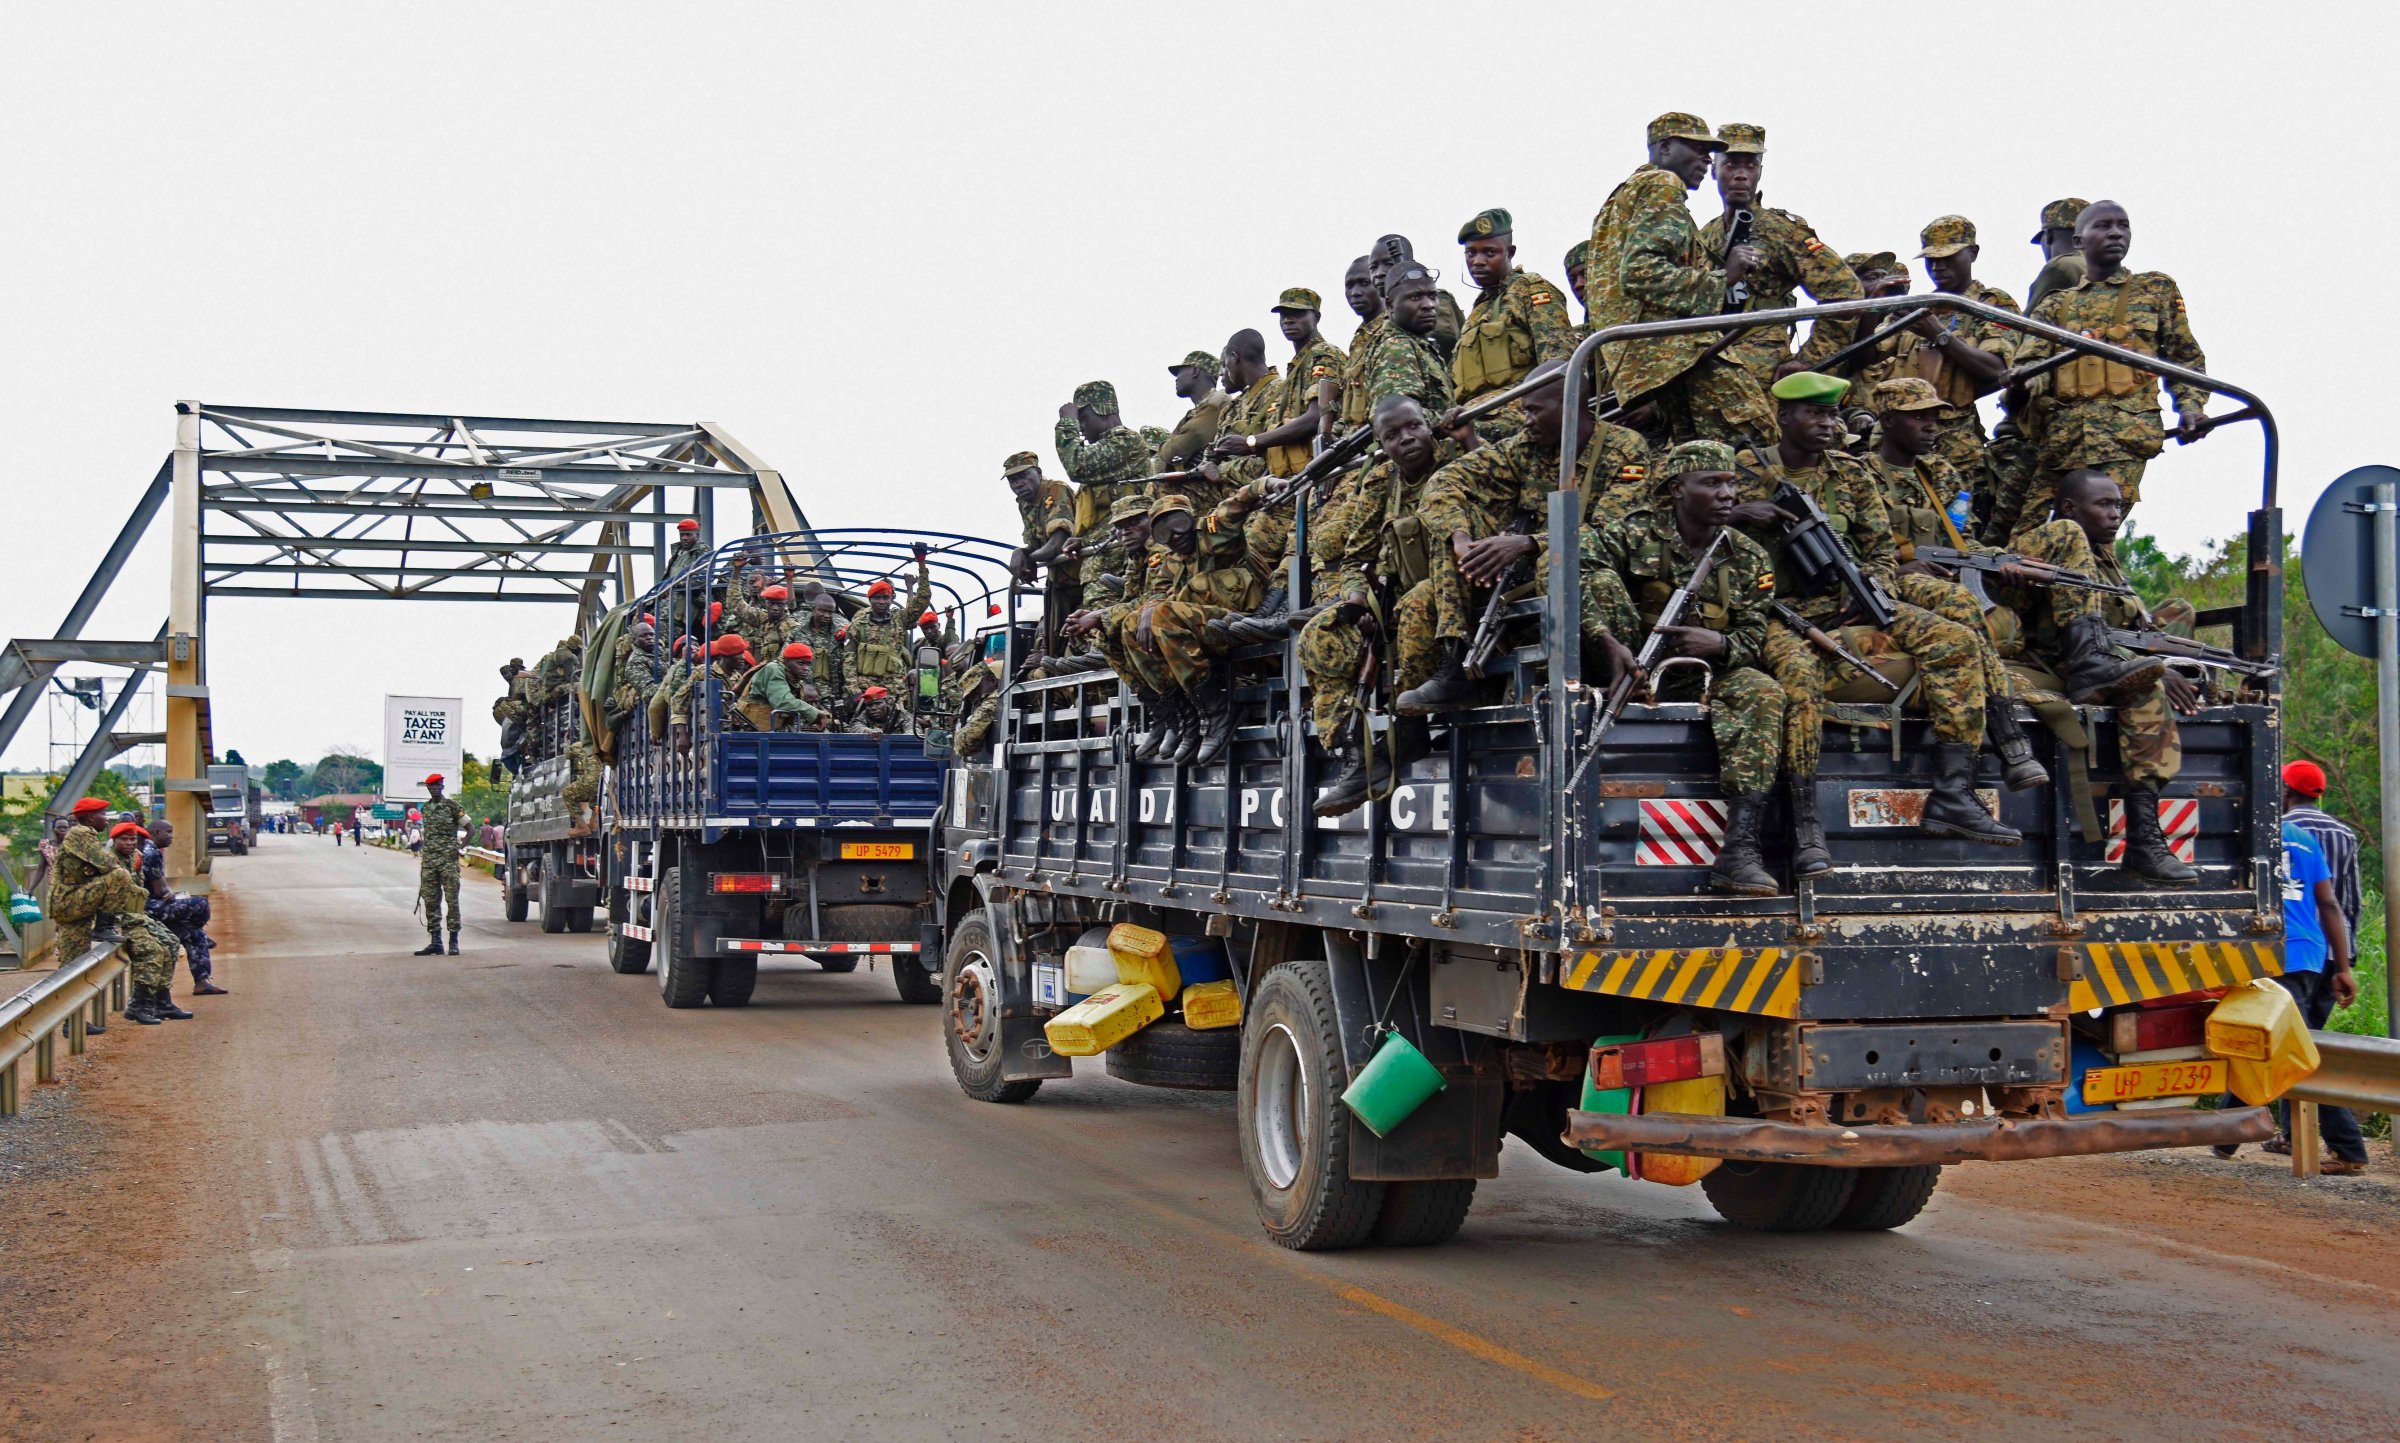 Uganda military personnel are seen atop military and police trucks as they drive towards Juba in South Sudan at Nimule border point on July 14, 2016.